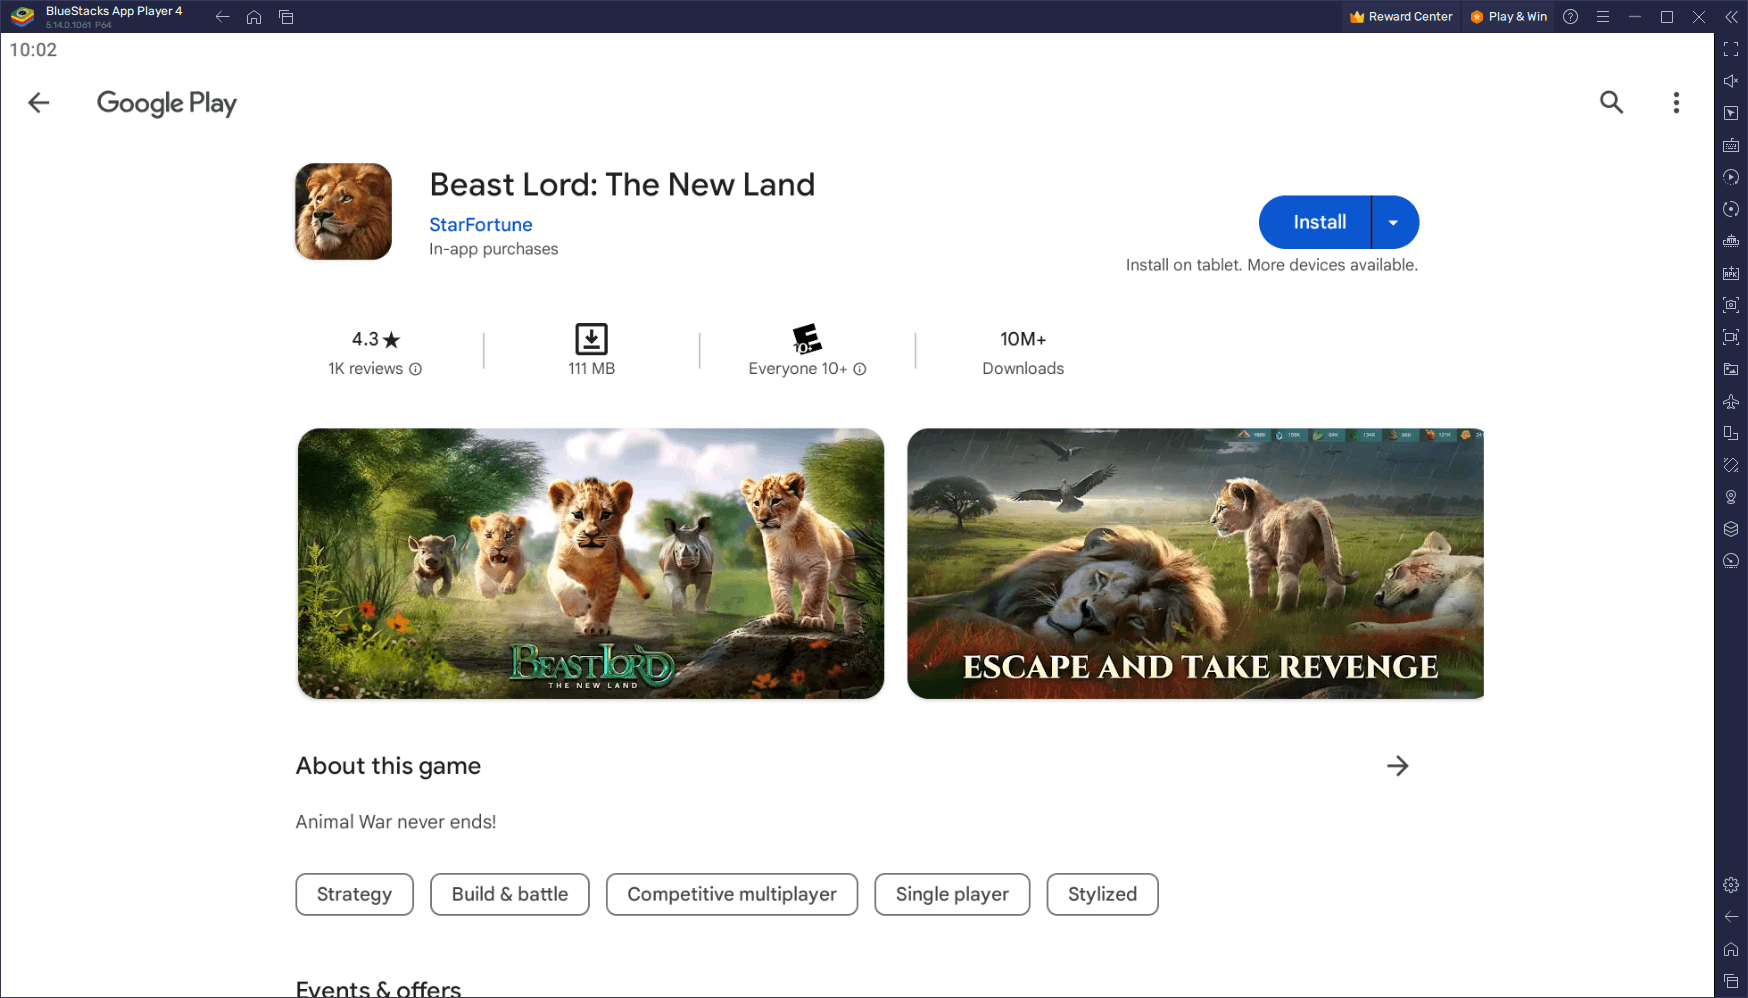 How to Play Beast Lord: The New Land on PC With BlueStacks